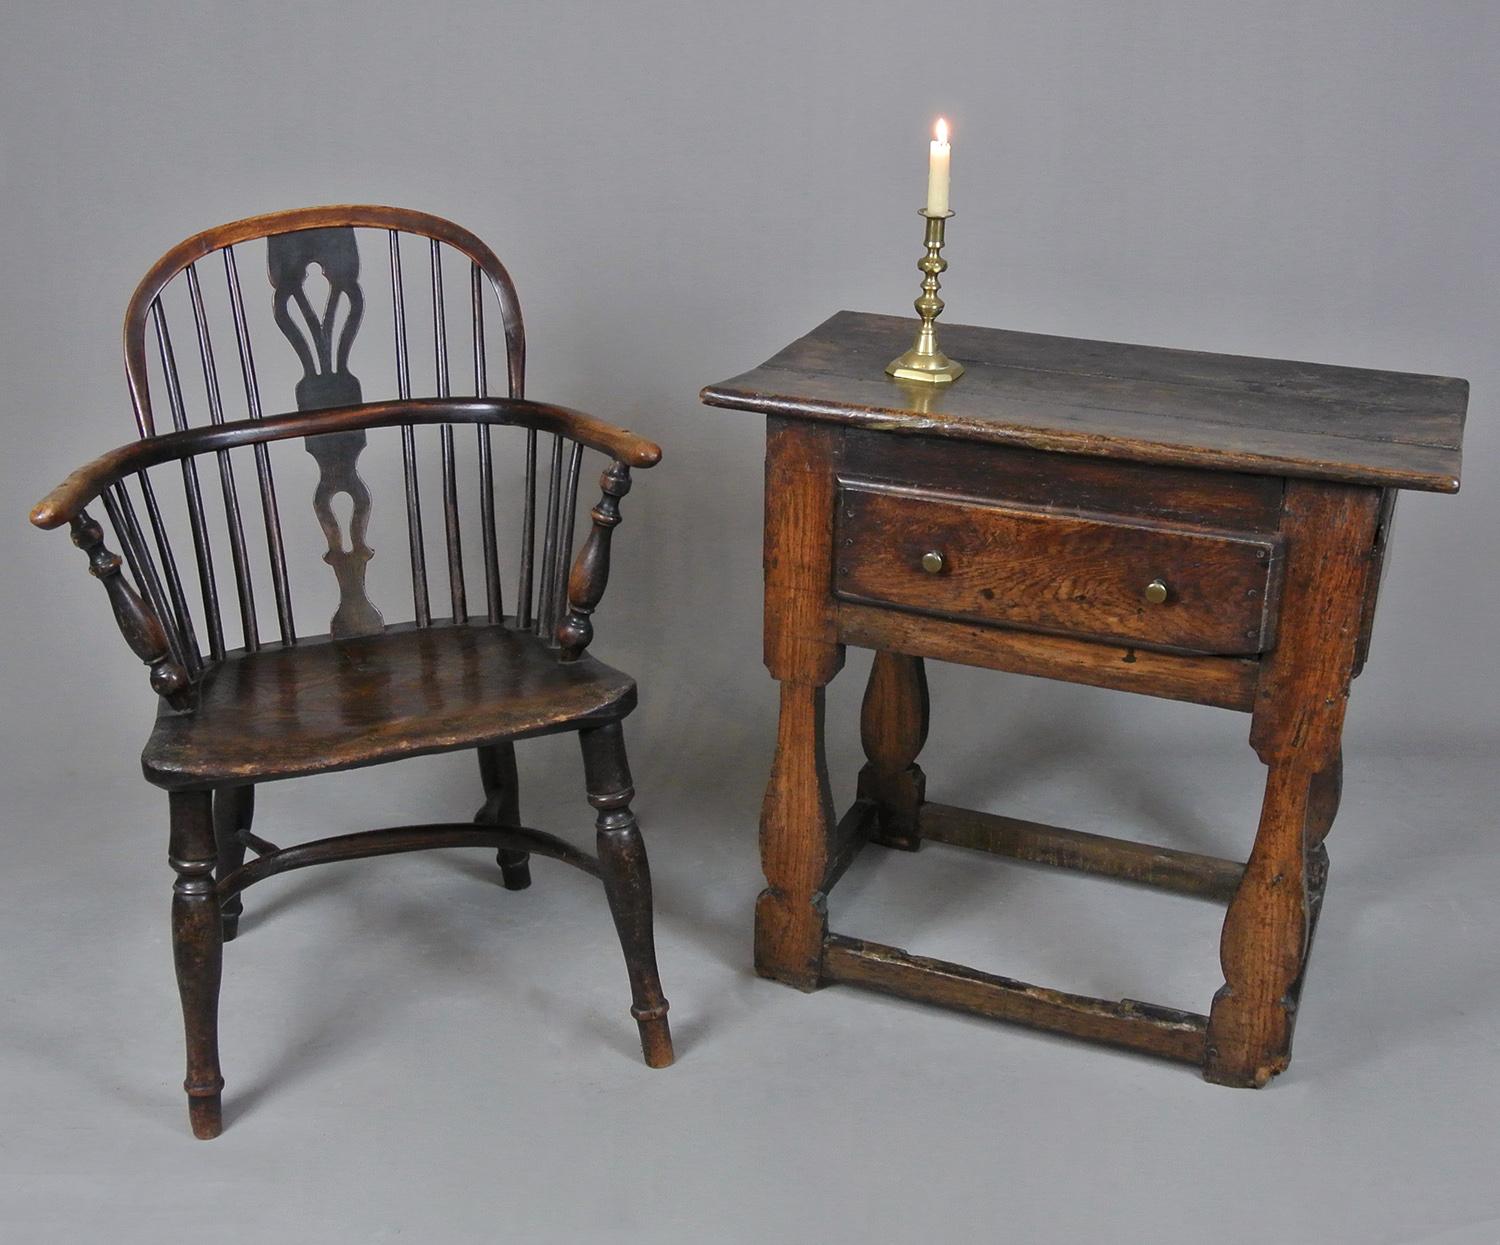 A rare and beautiful small oak and elm tavern table, peg jointed throughout and with lovely shaped supports united by a box stretcher.  The drawer original also with a thickly hewn oak lining and nailed up bottom.  The three boarded weather top with